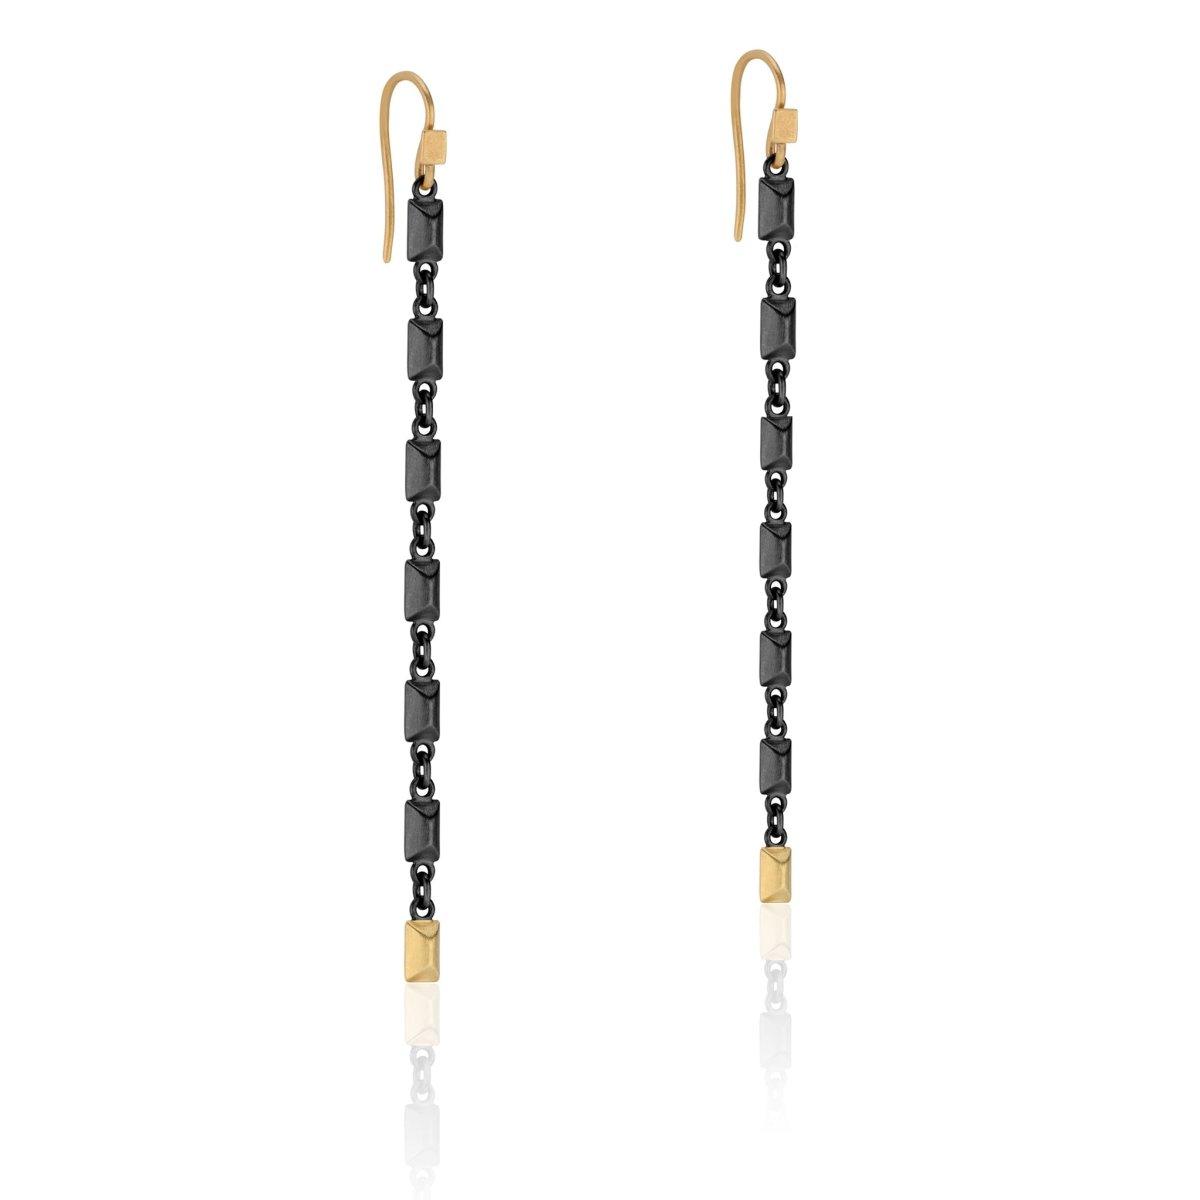 Oxidized Sparks Fly Earrings with Gold - Nataly Aponte